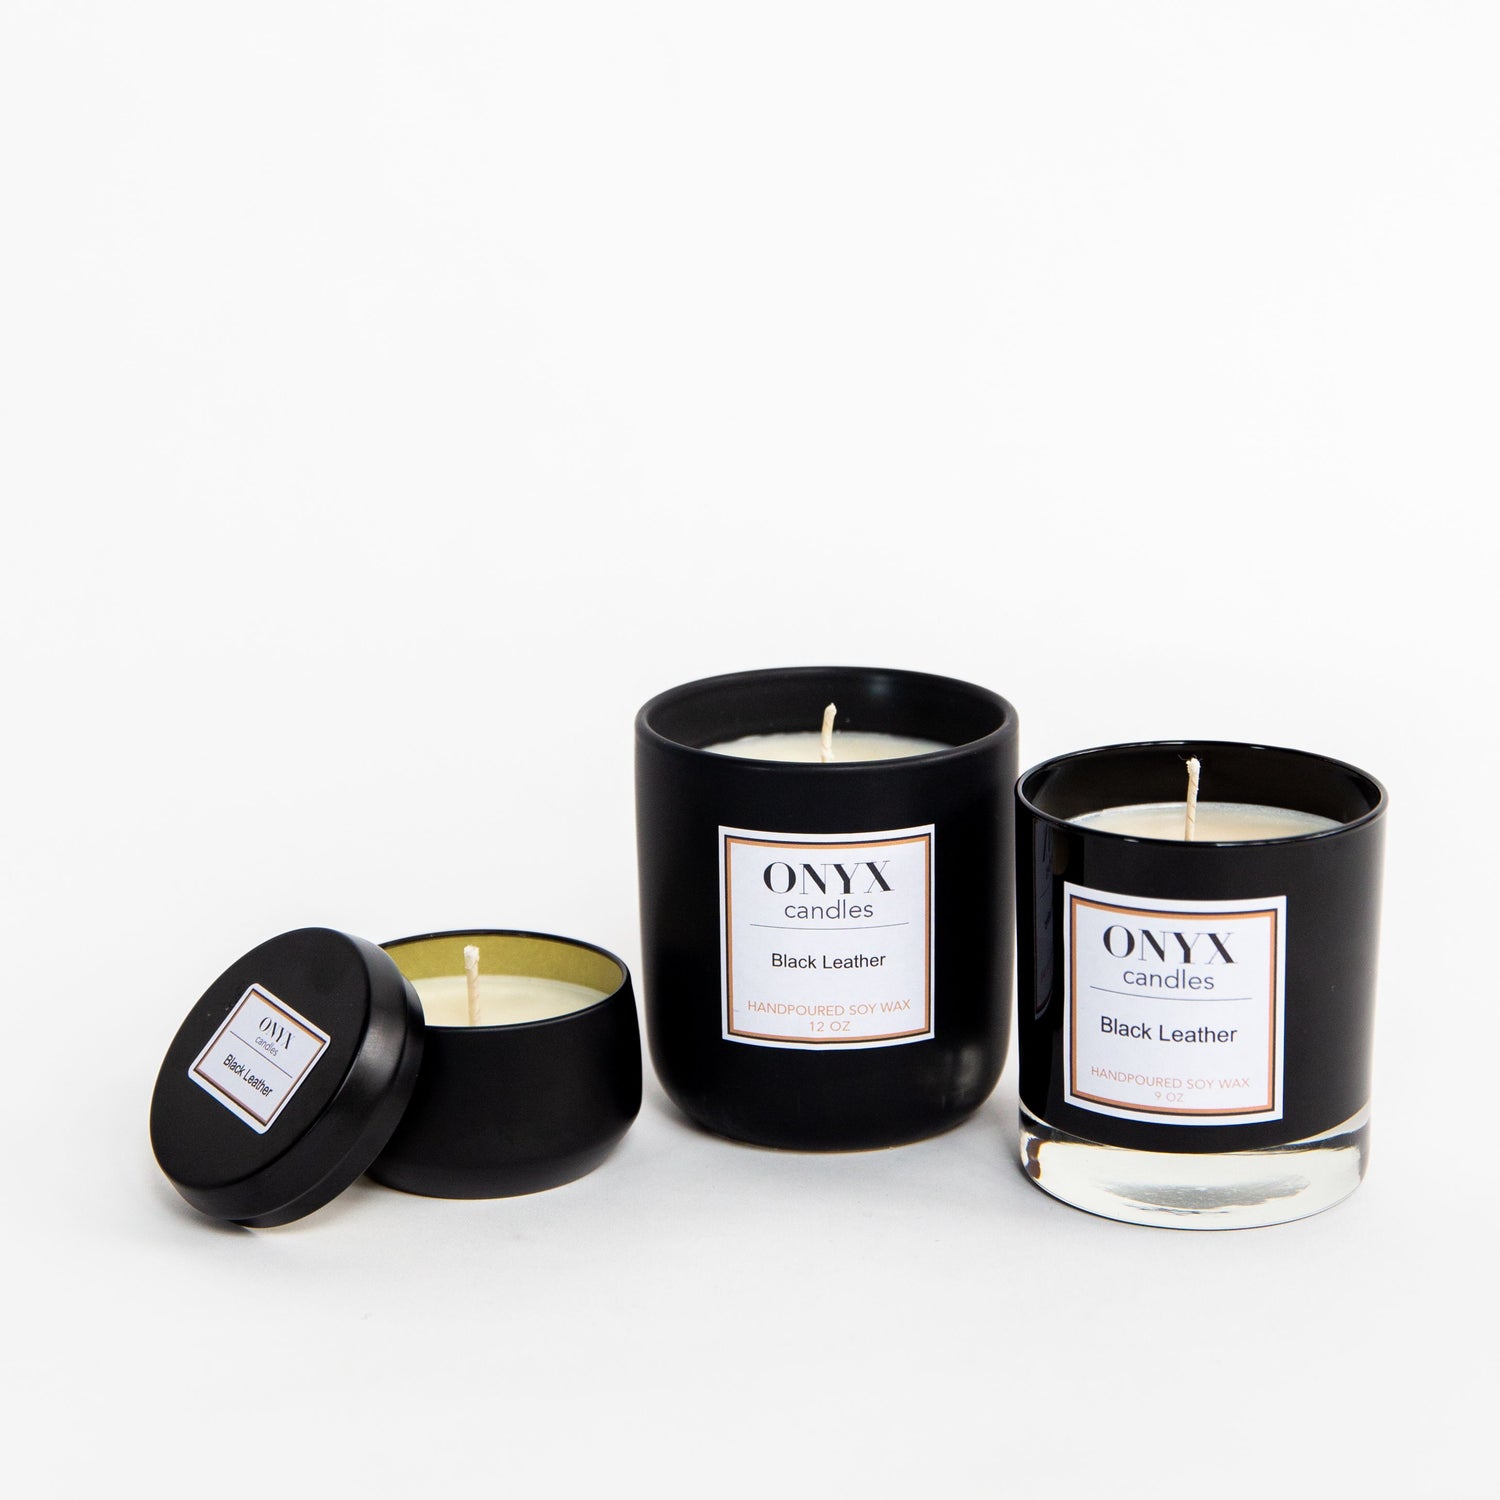 Pictured here are three size varieties of Onyx candles, in the scent Black Leather